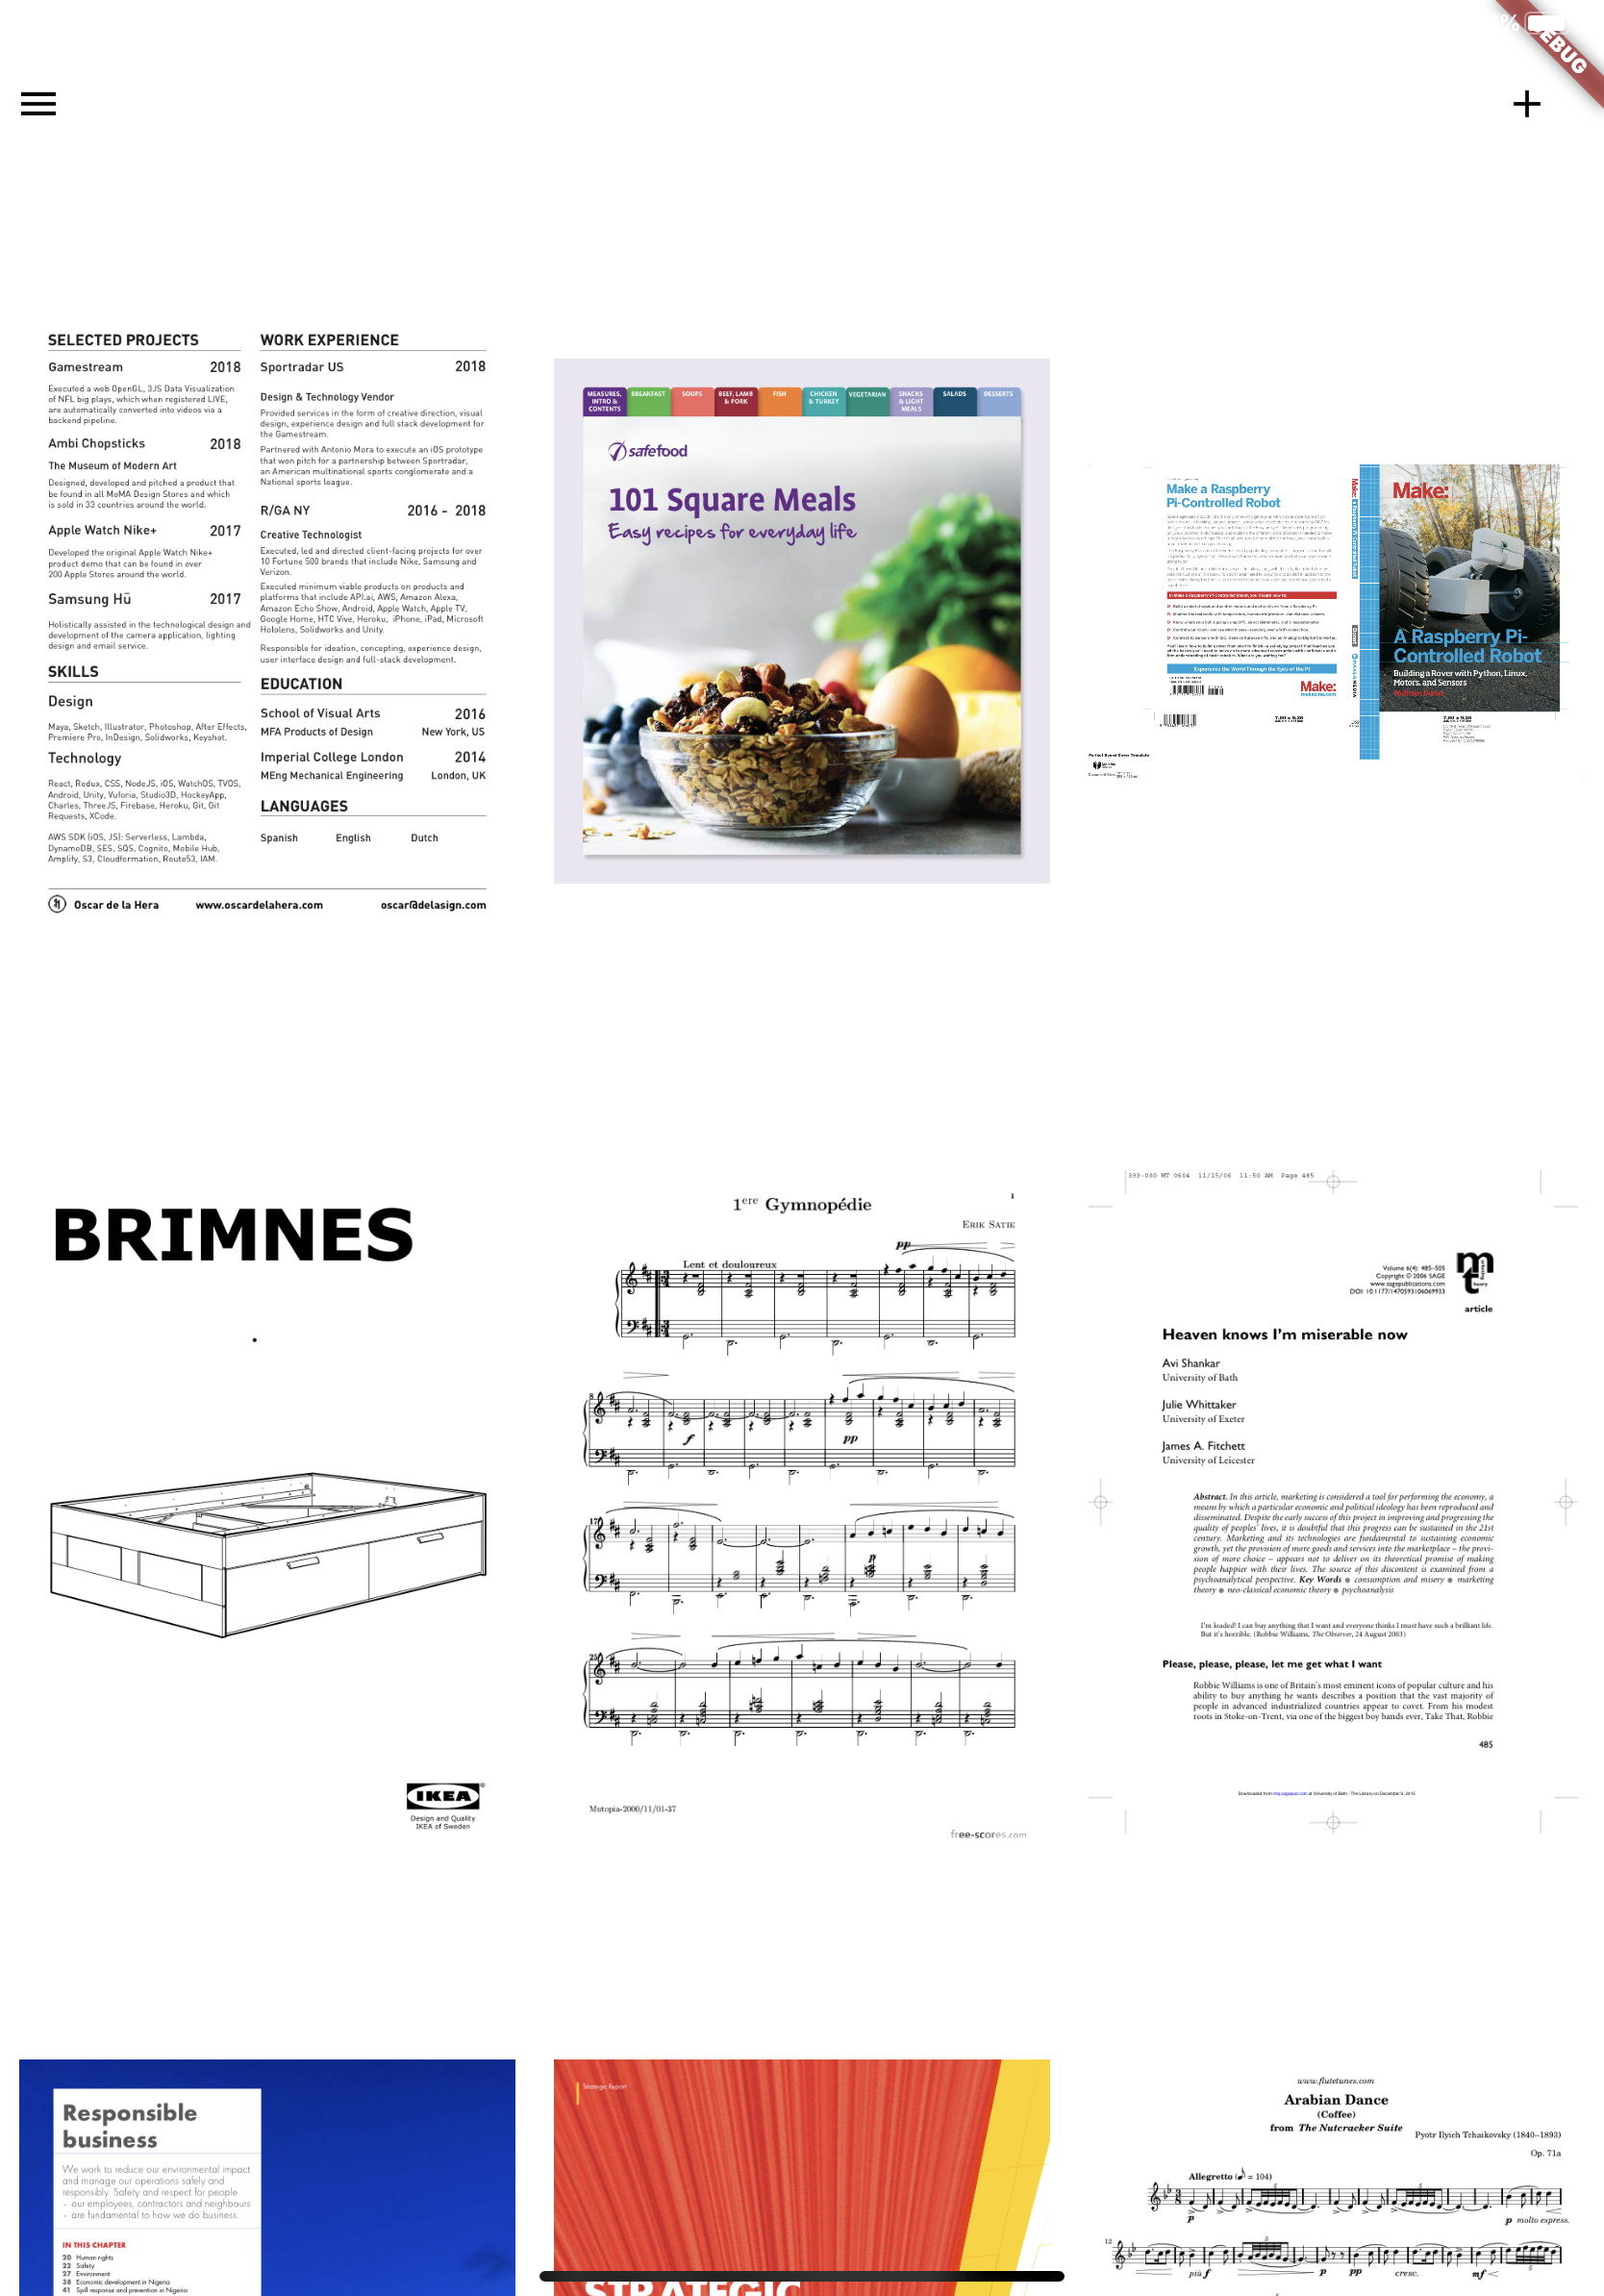 A screenshot of the Flutter prototype showing the images of different books or documents